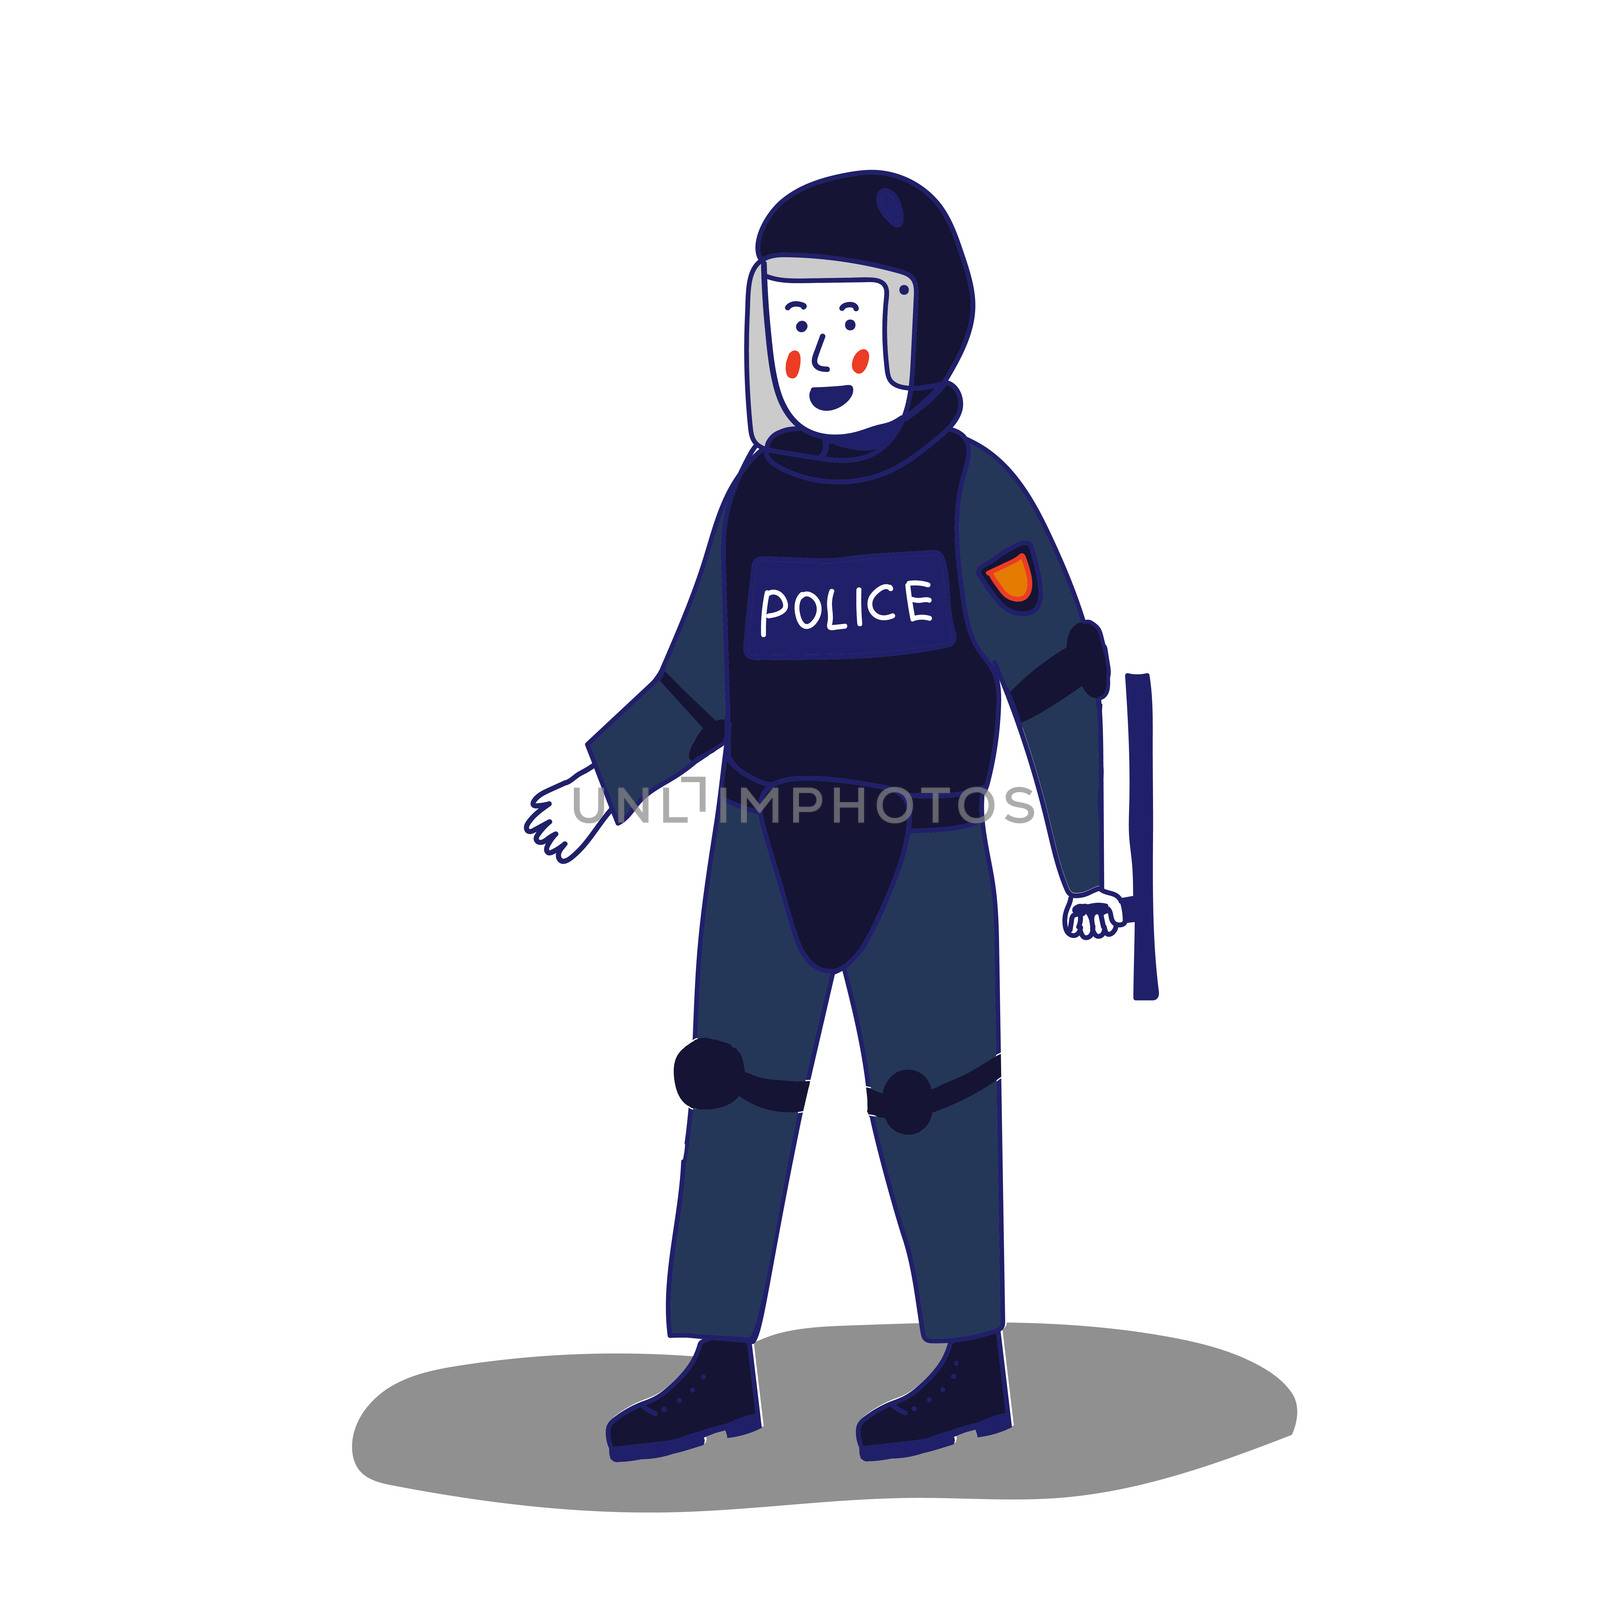 Uniformed police officer standing with a shield and a baton on a white background in cartoon style. illustration with a blue line